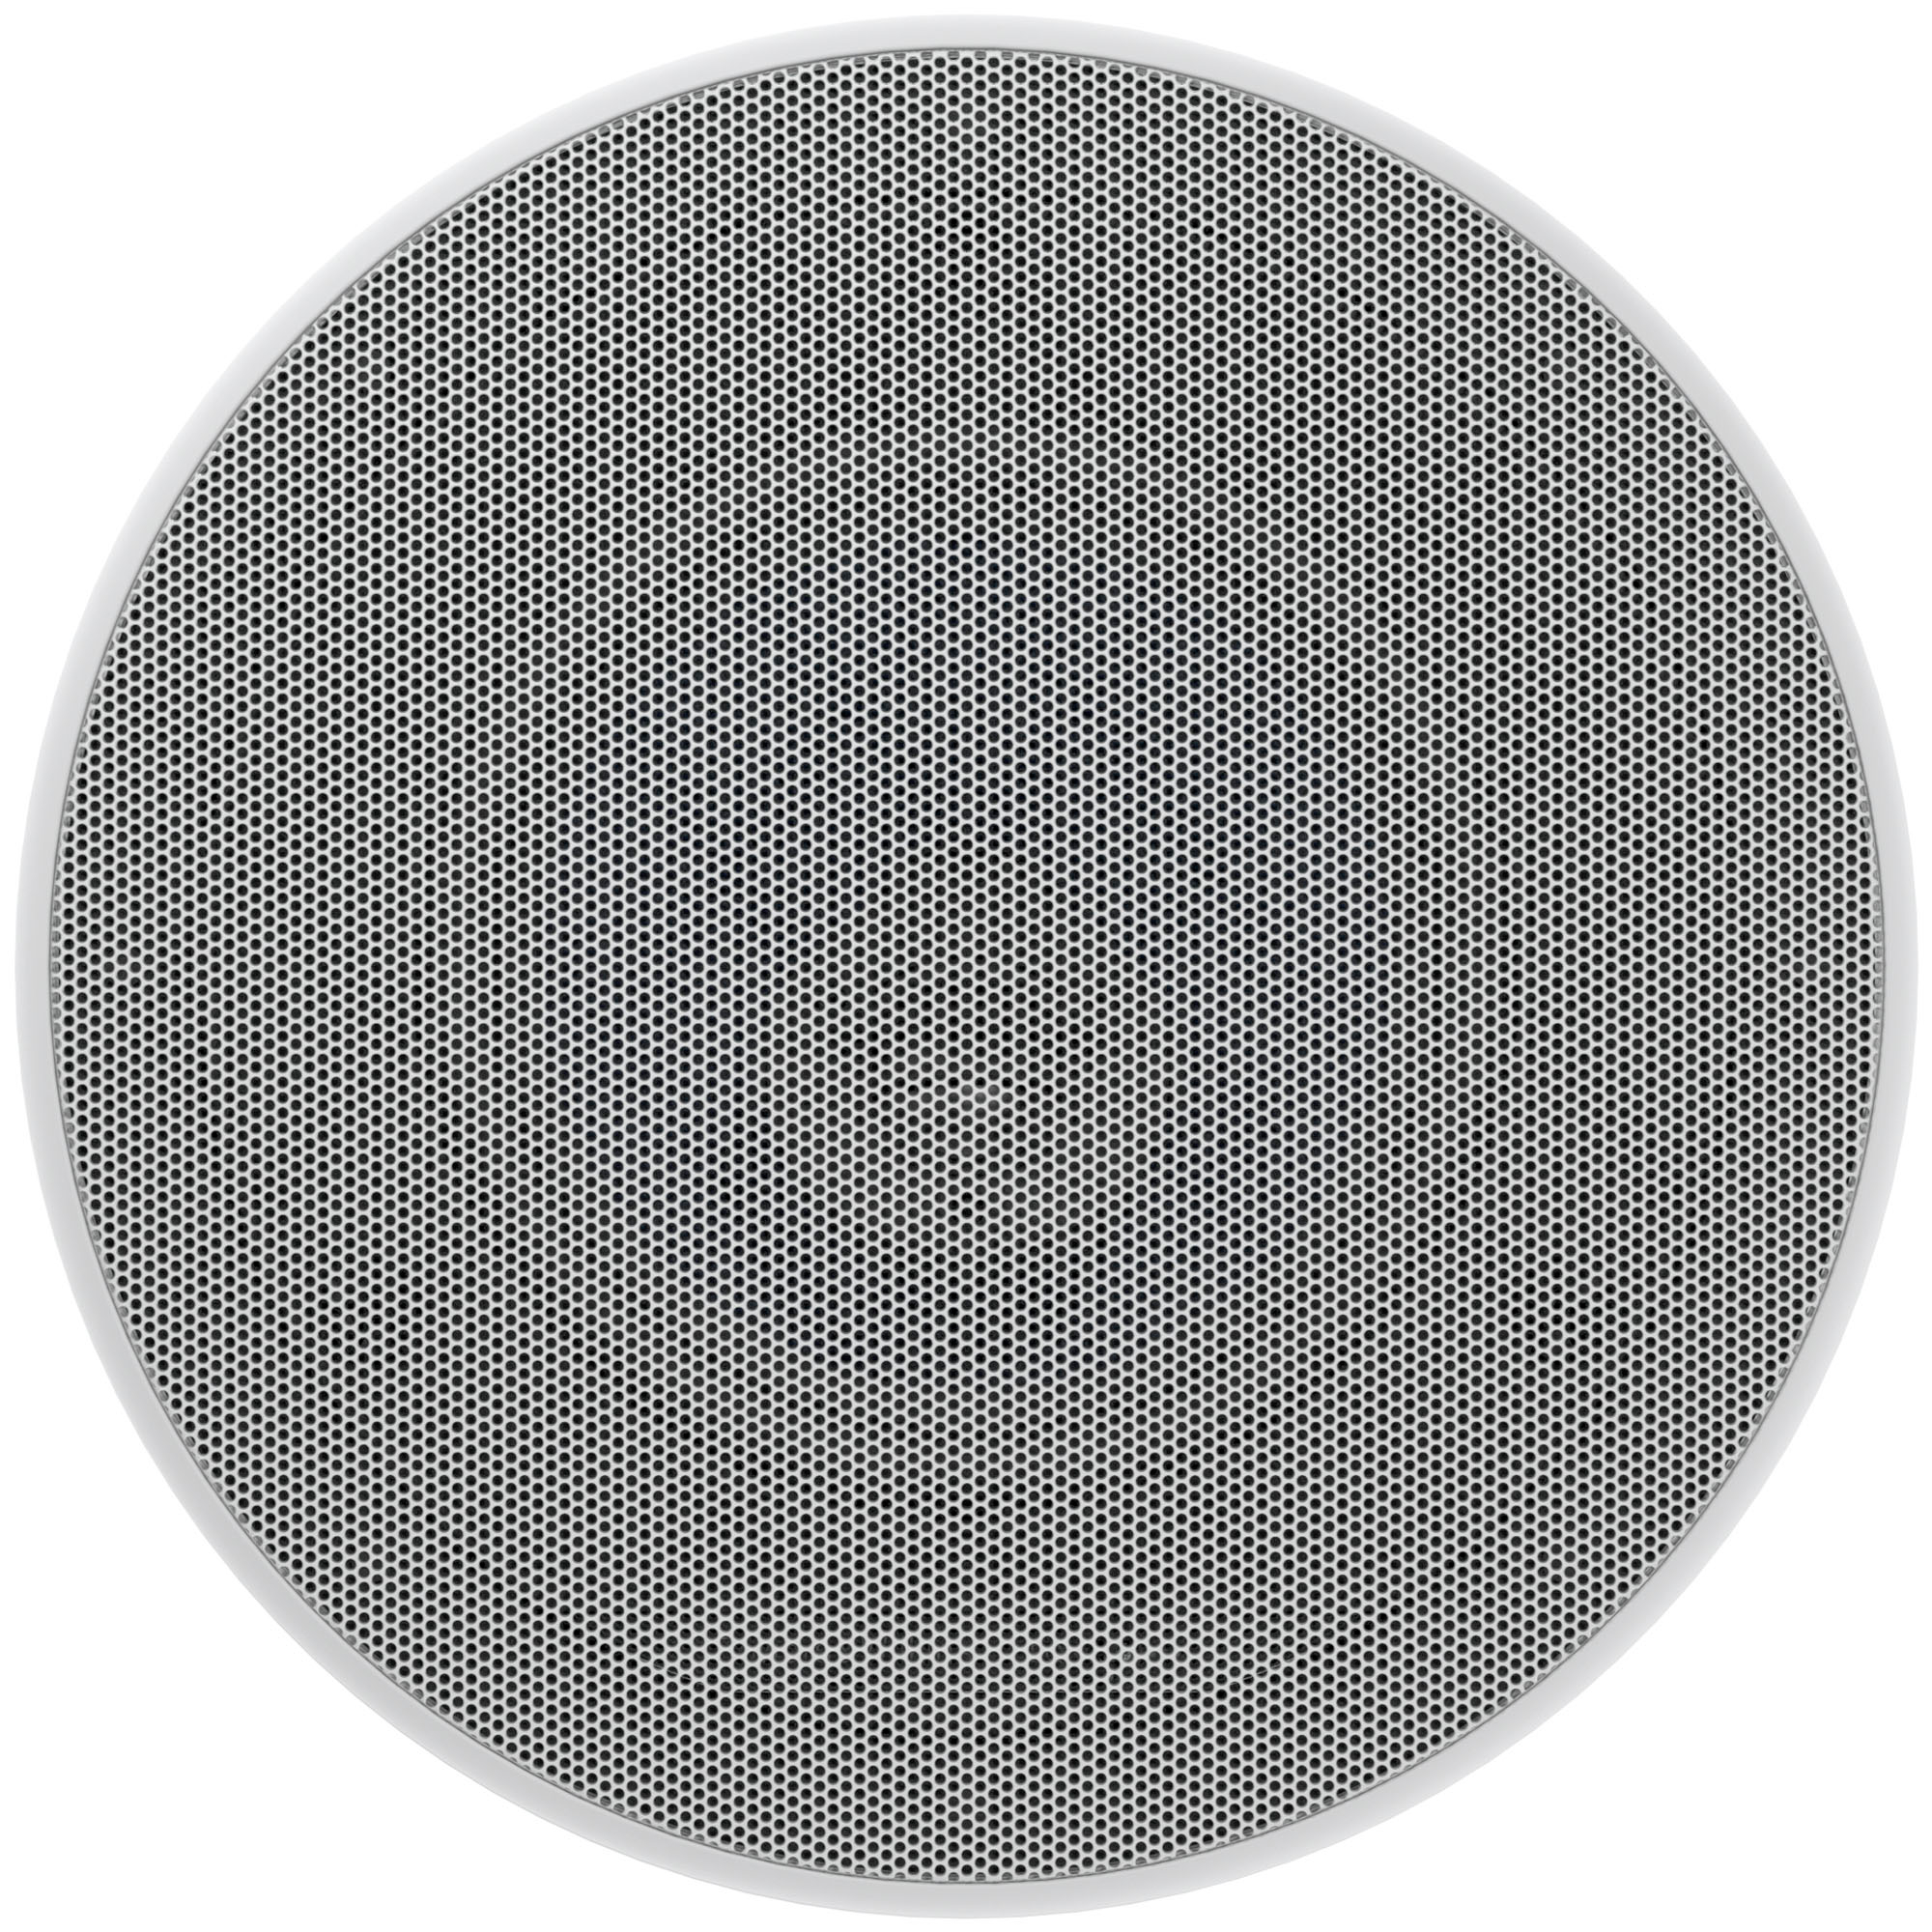 Bowers & Wilkins - CI600 Series 6" Dual Channel Stereo Surround In-Ceiling Speaker w/Aramid Fiber Midbass - (Each) - Paintable White